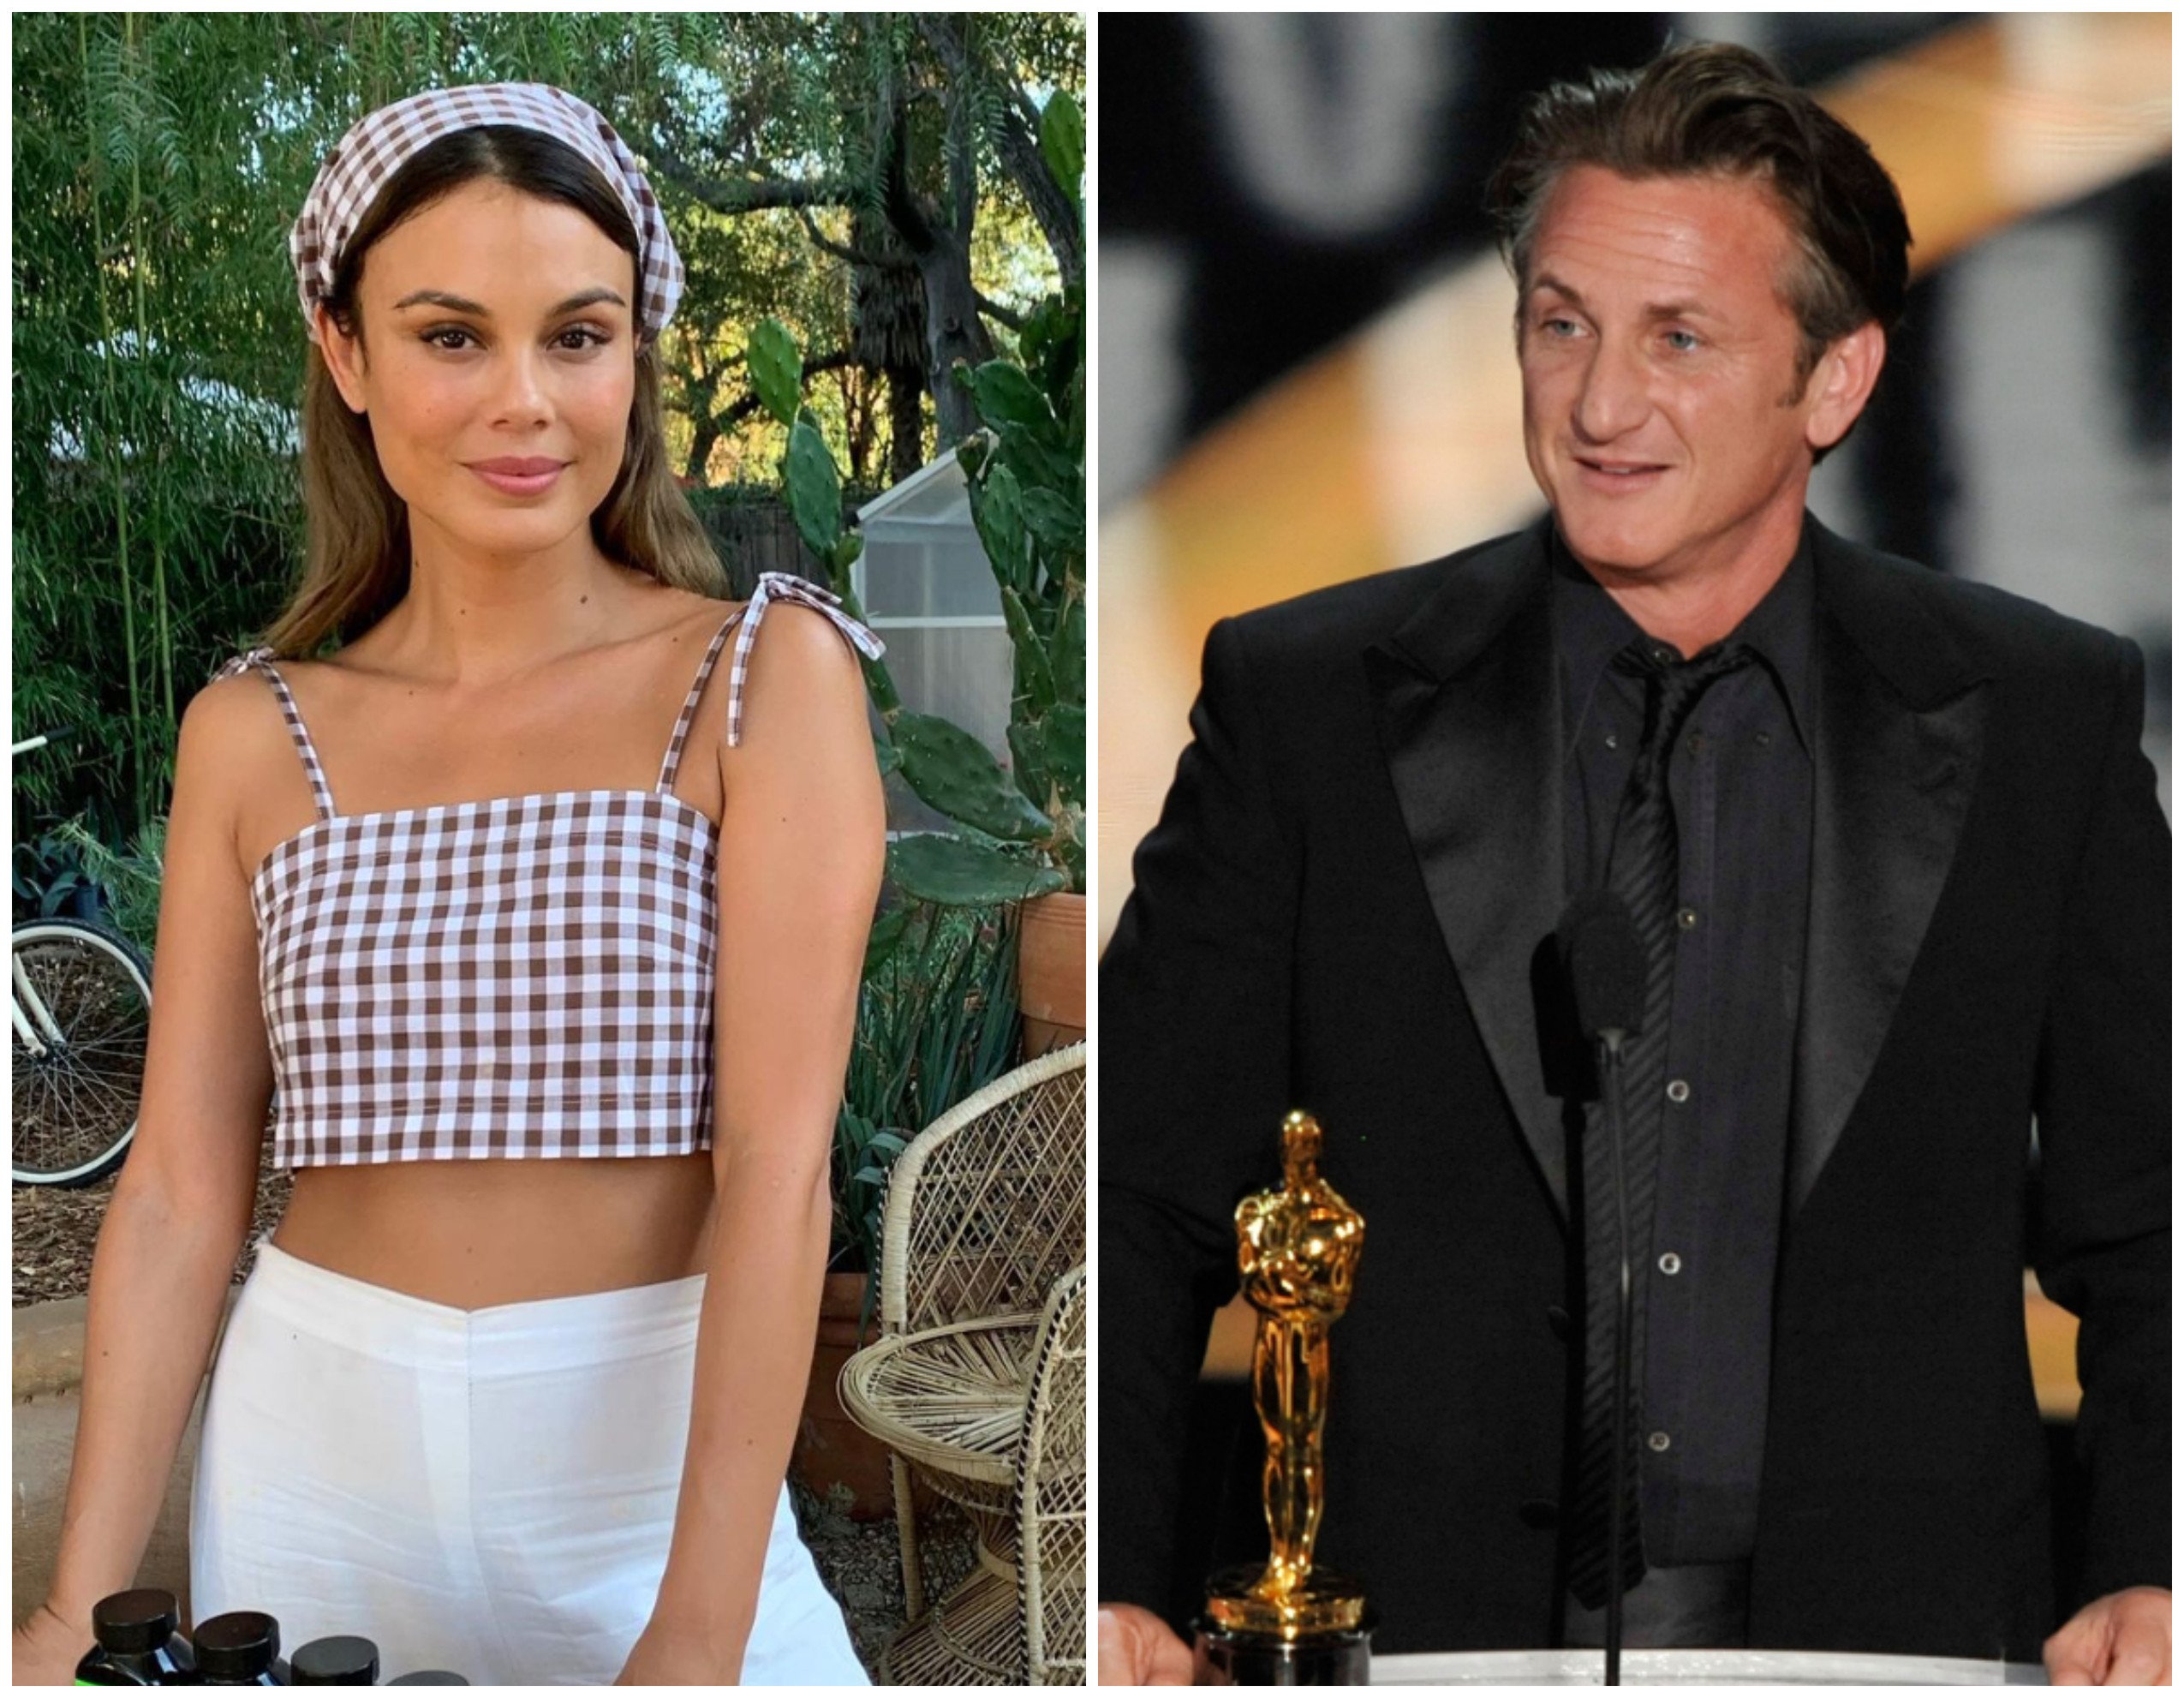 Nathalie Kelly has ditched Hollywood to champion social causes instead – and is dating actor Sean Penn. Photos: @natkelley/Instagram, Getty Images